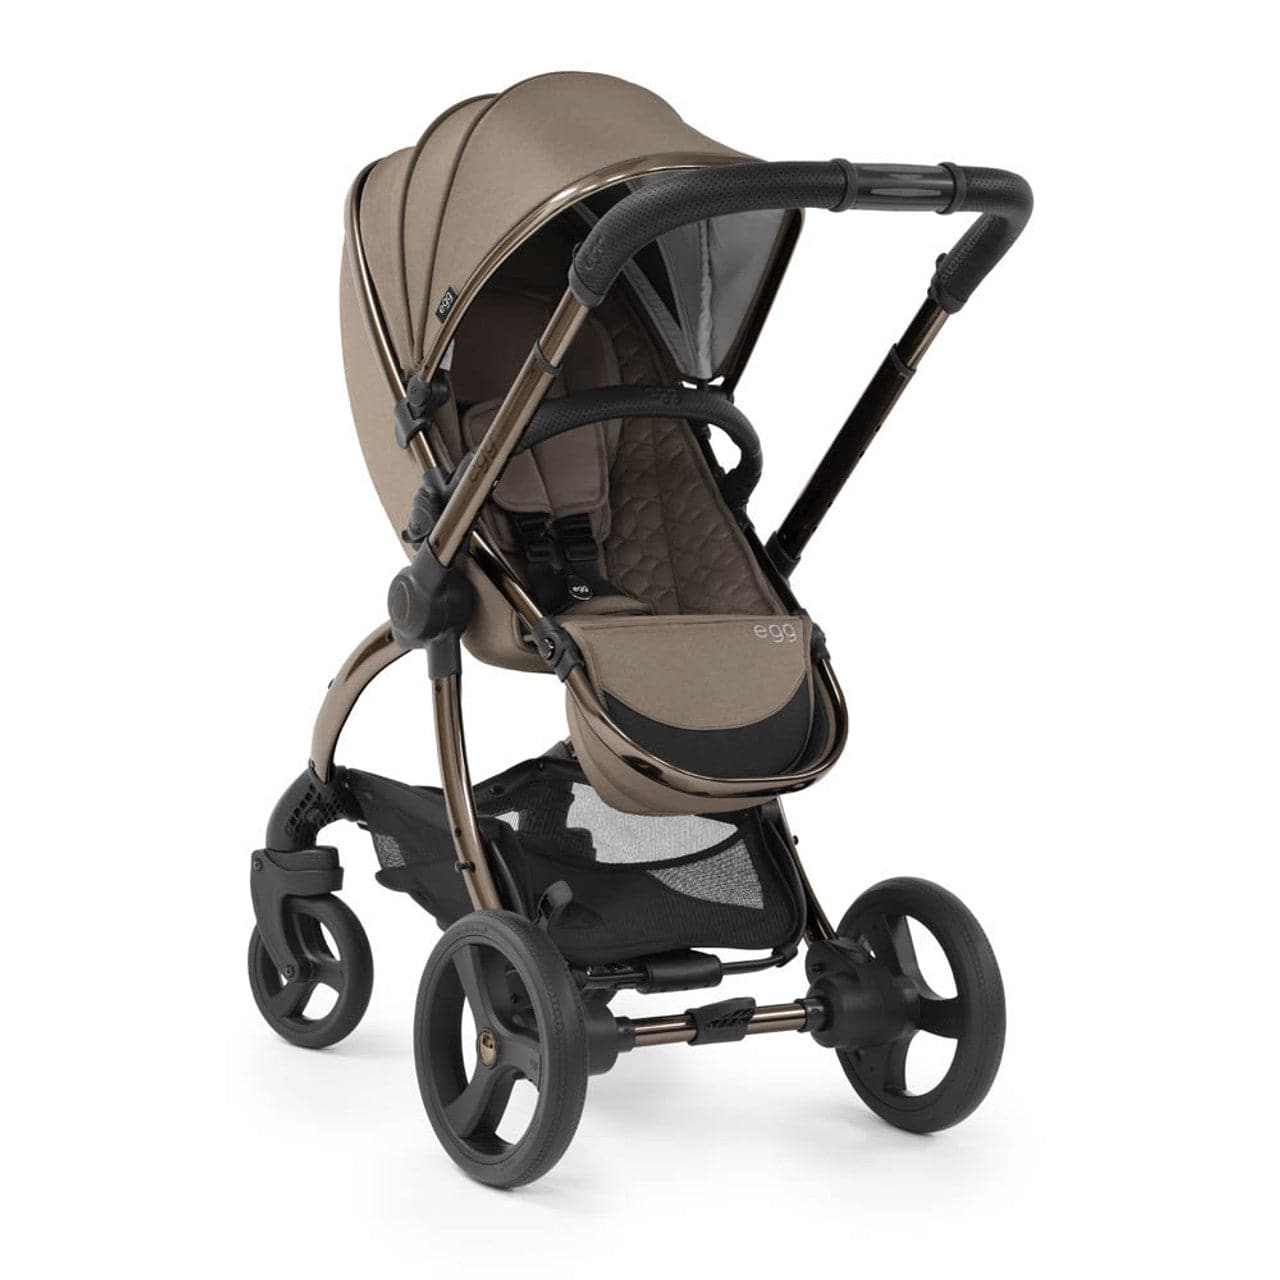 Egg® 2 Luxury Shell i-Size Travel System Bundle - Mink - For Your Little One